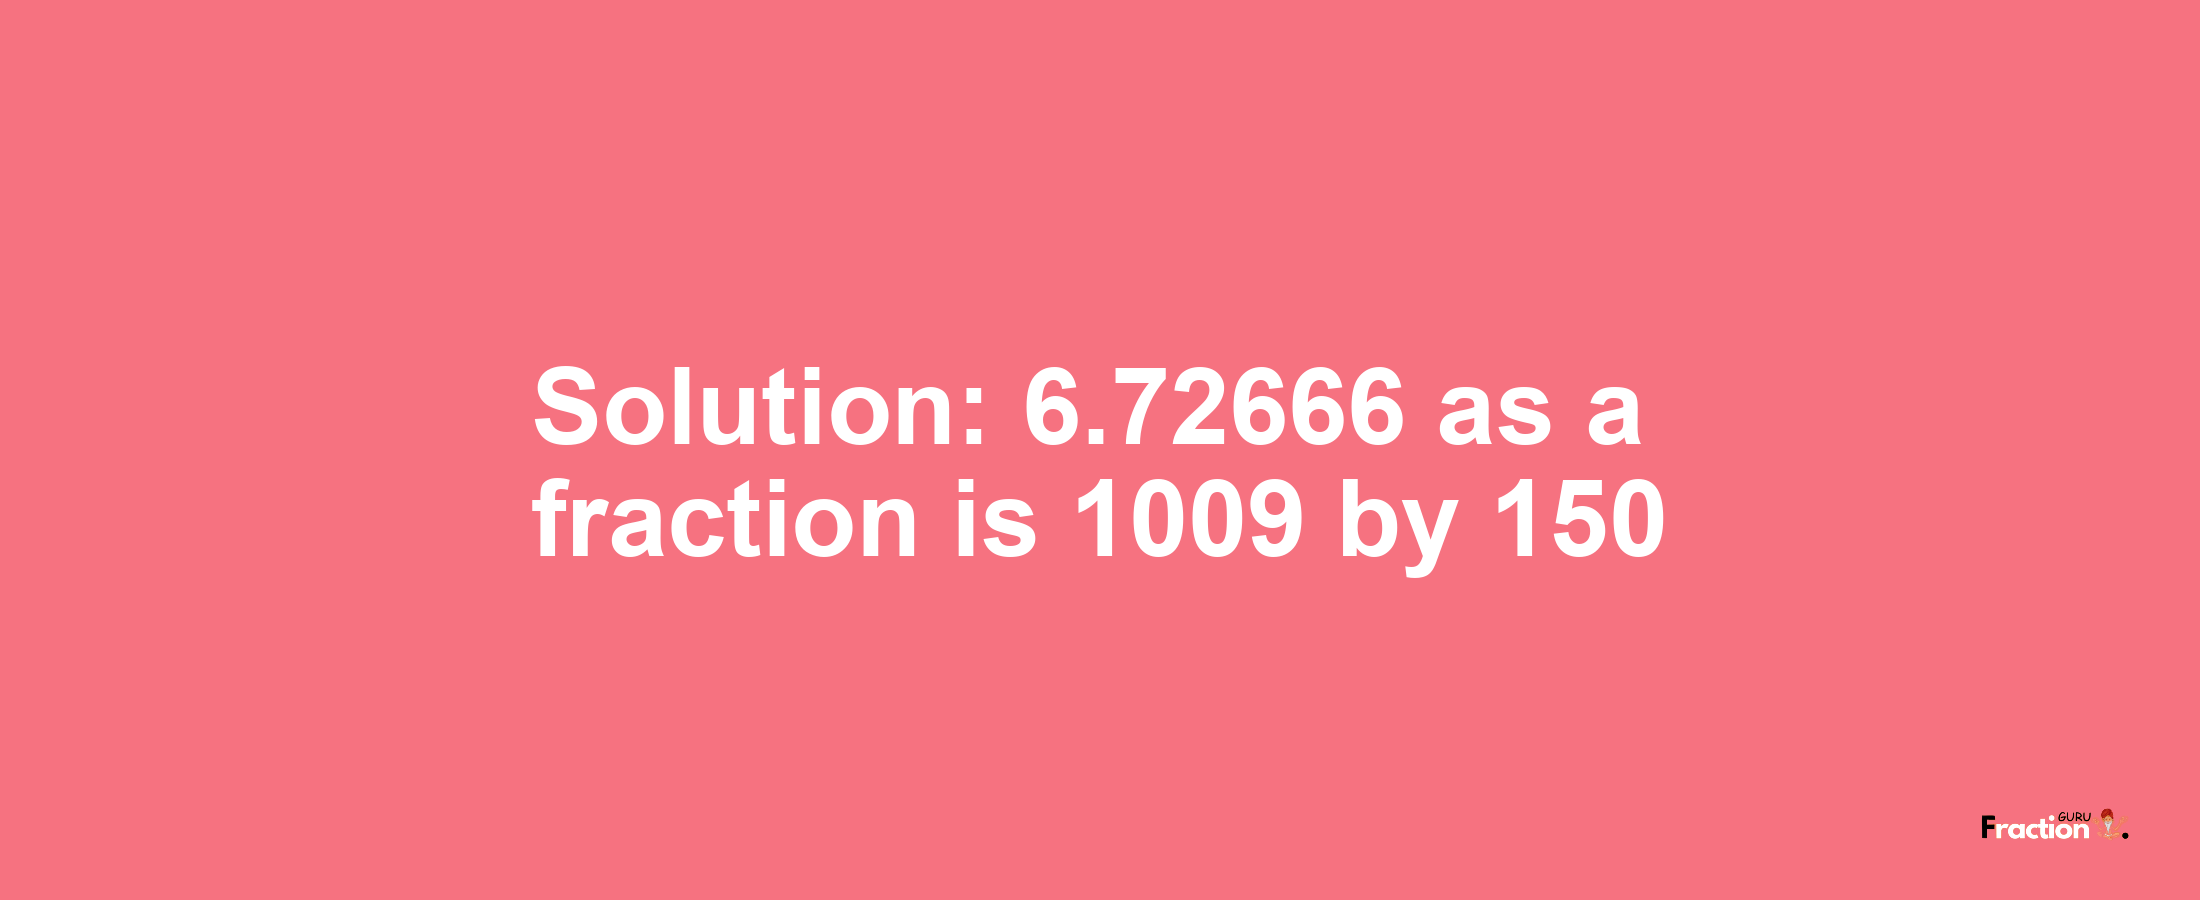 Solution:6.72666 as a fraction is 1009/150